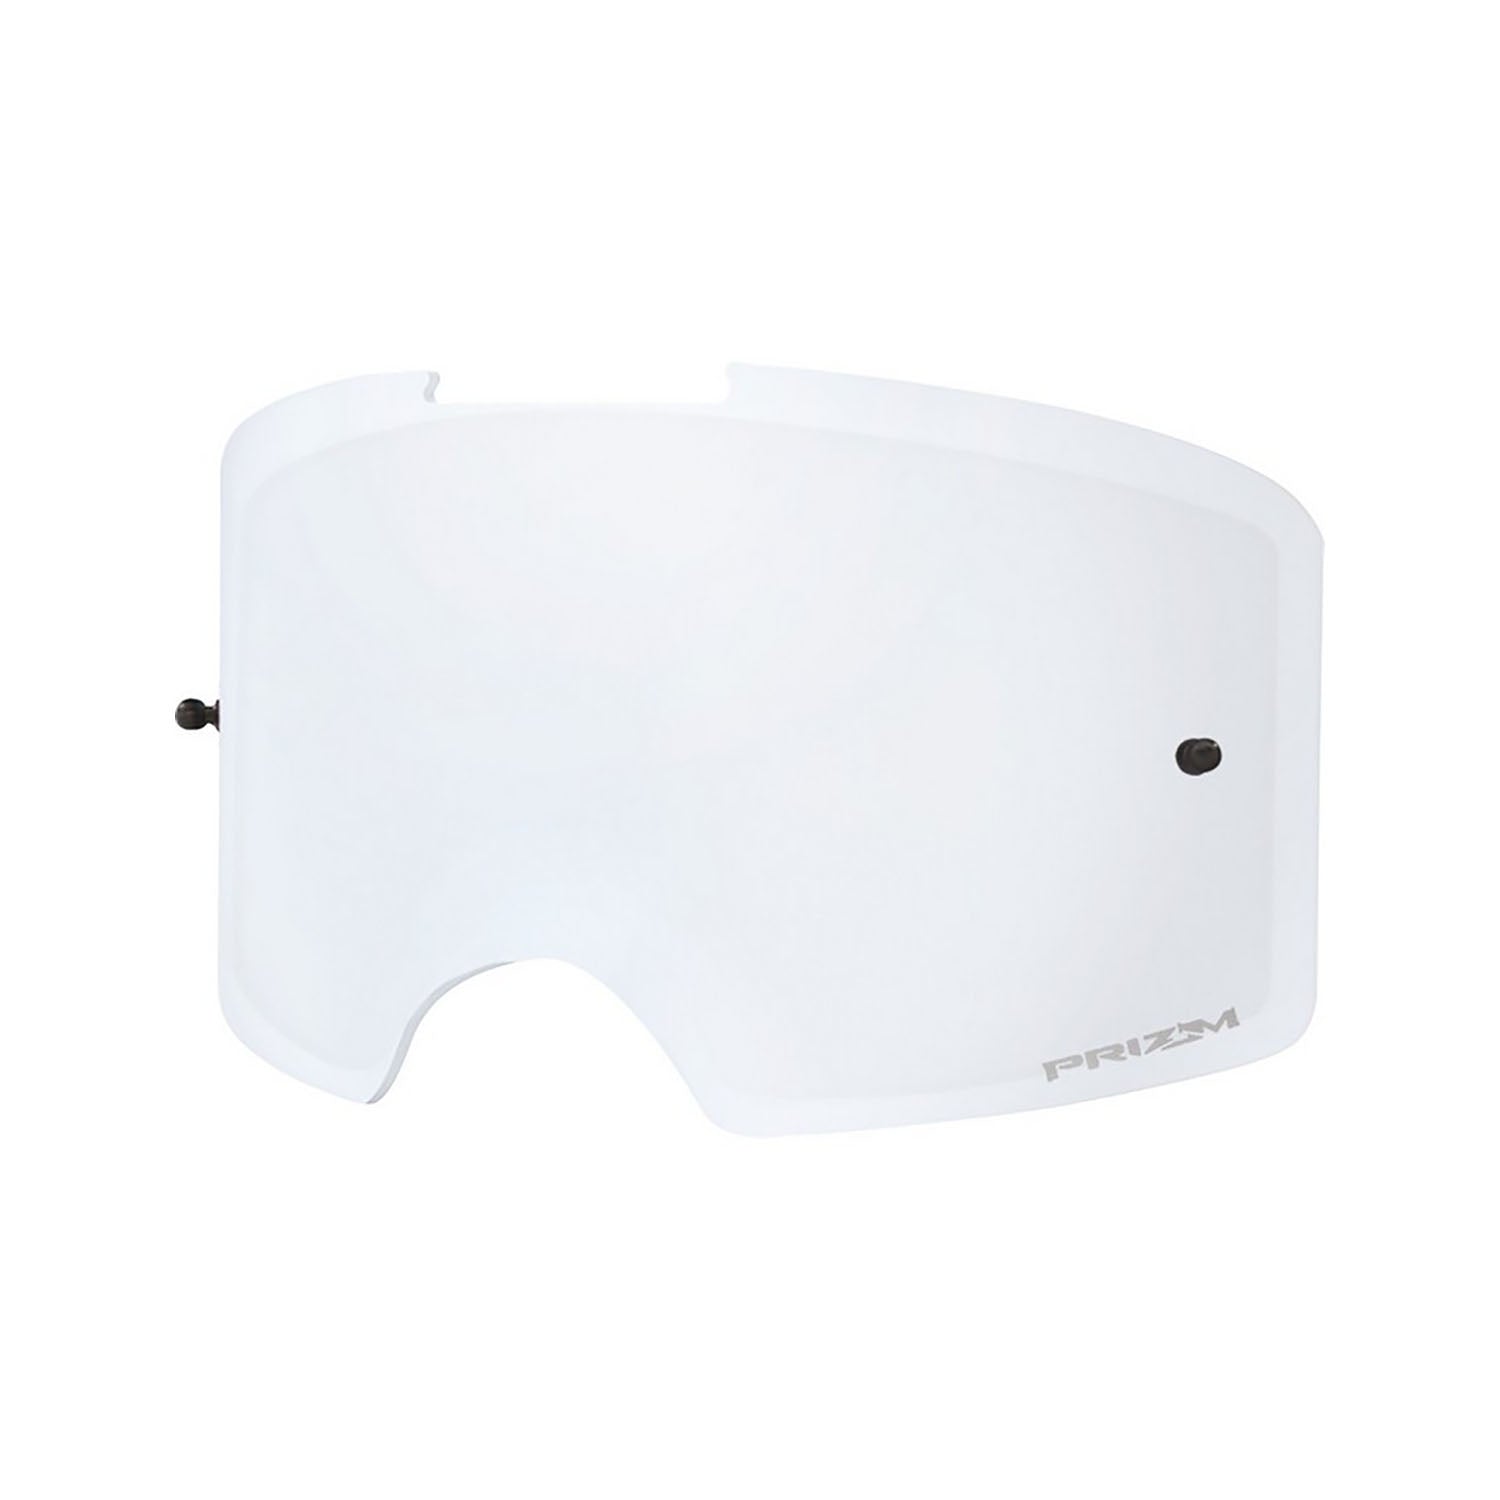 Oakley Replacement Lens Front Line MX clear lens product image